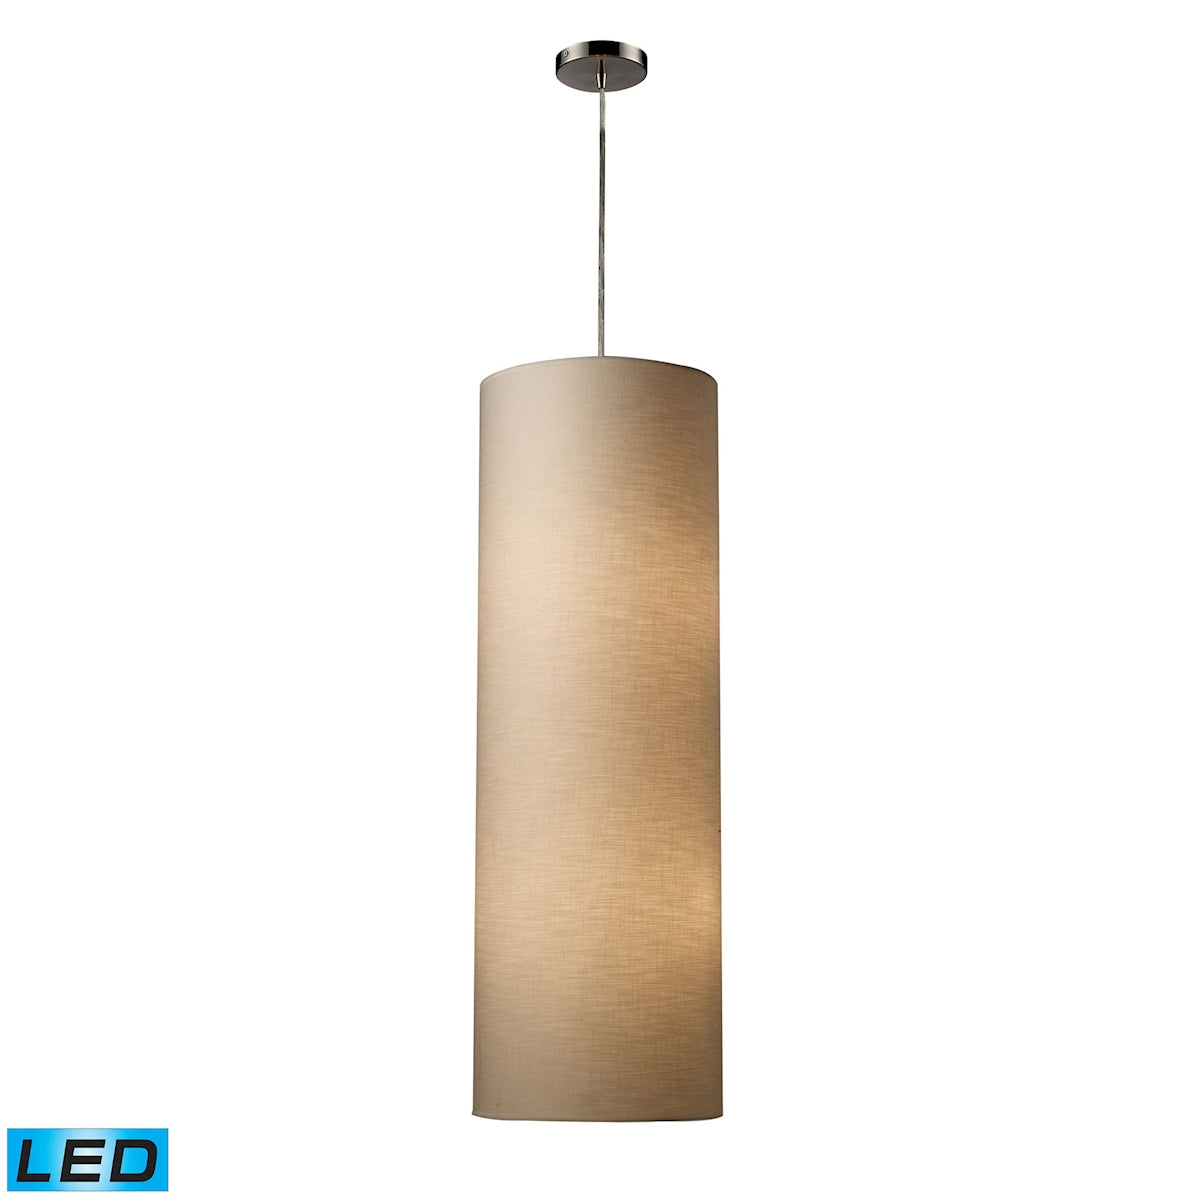 ELK Lighting 20160/4-LED Fabric Cylinders 4-Light Mini Pendant in Satin Nickel with 1 Shade - Includes LED Bulbs